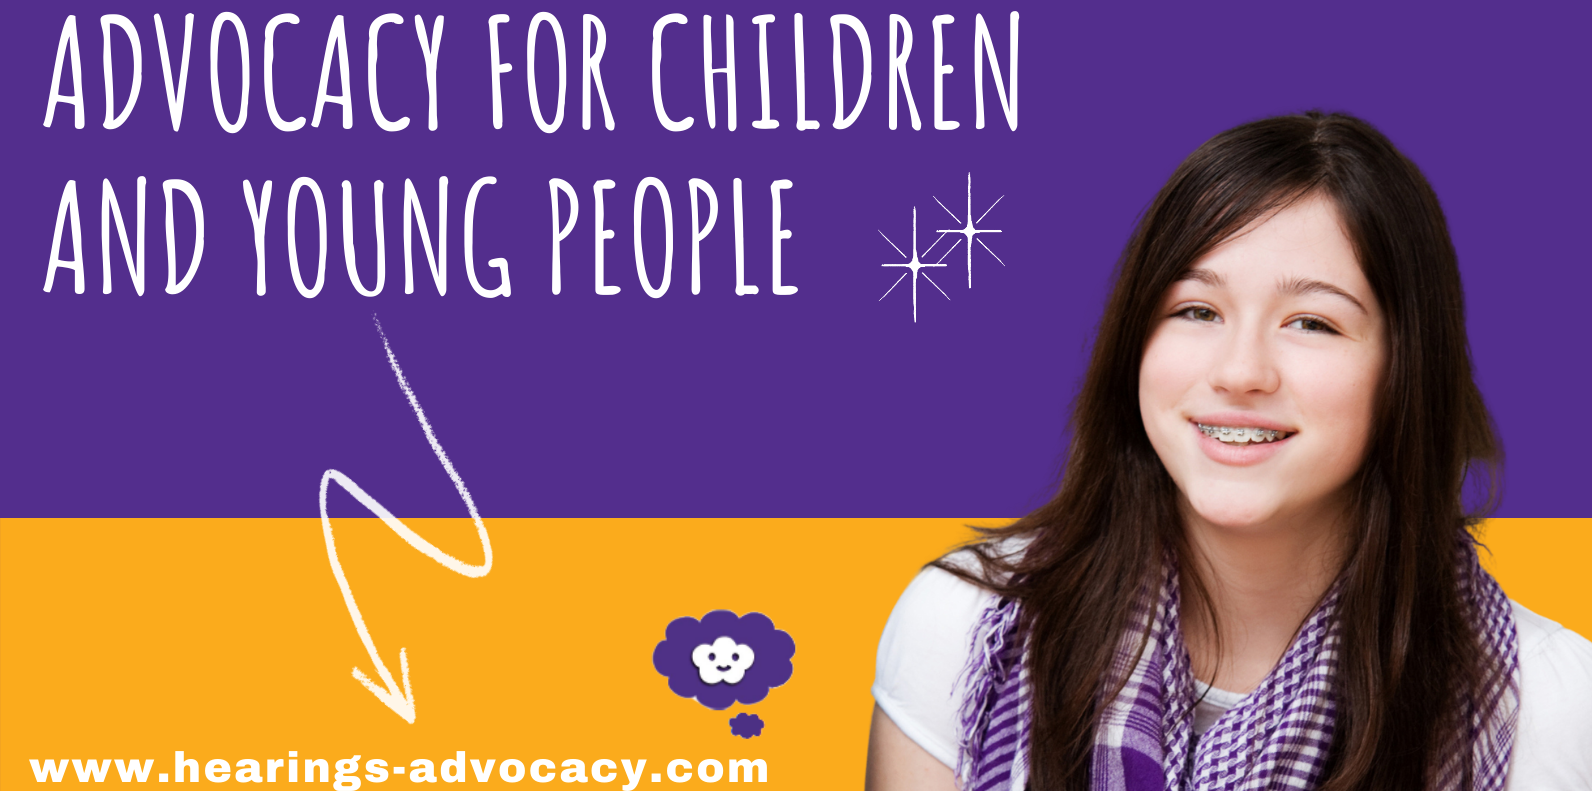 Graphic text - Advocacy for children and young people